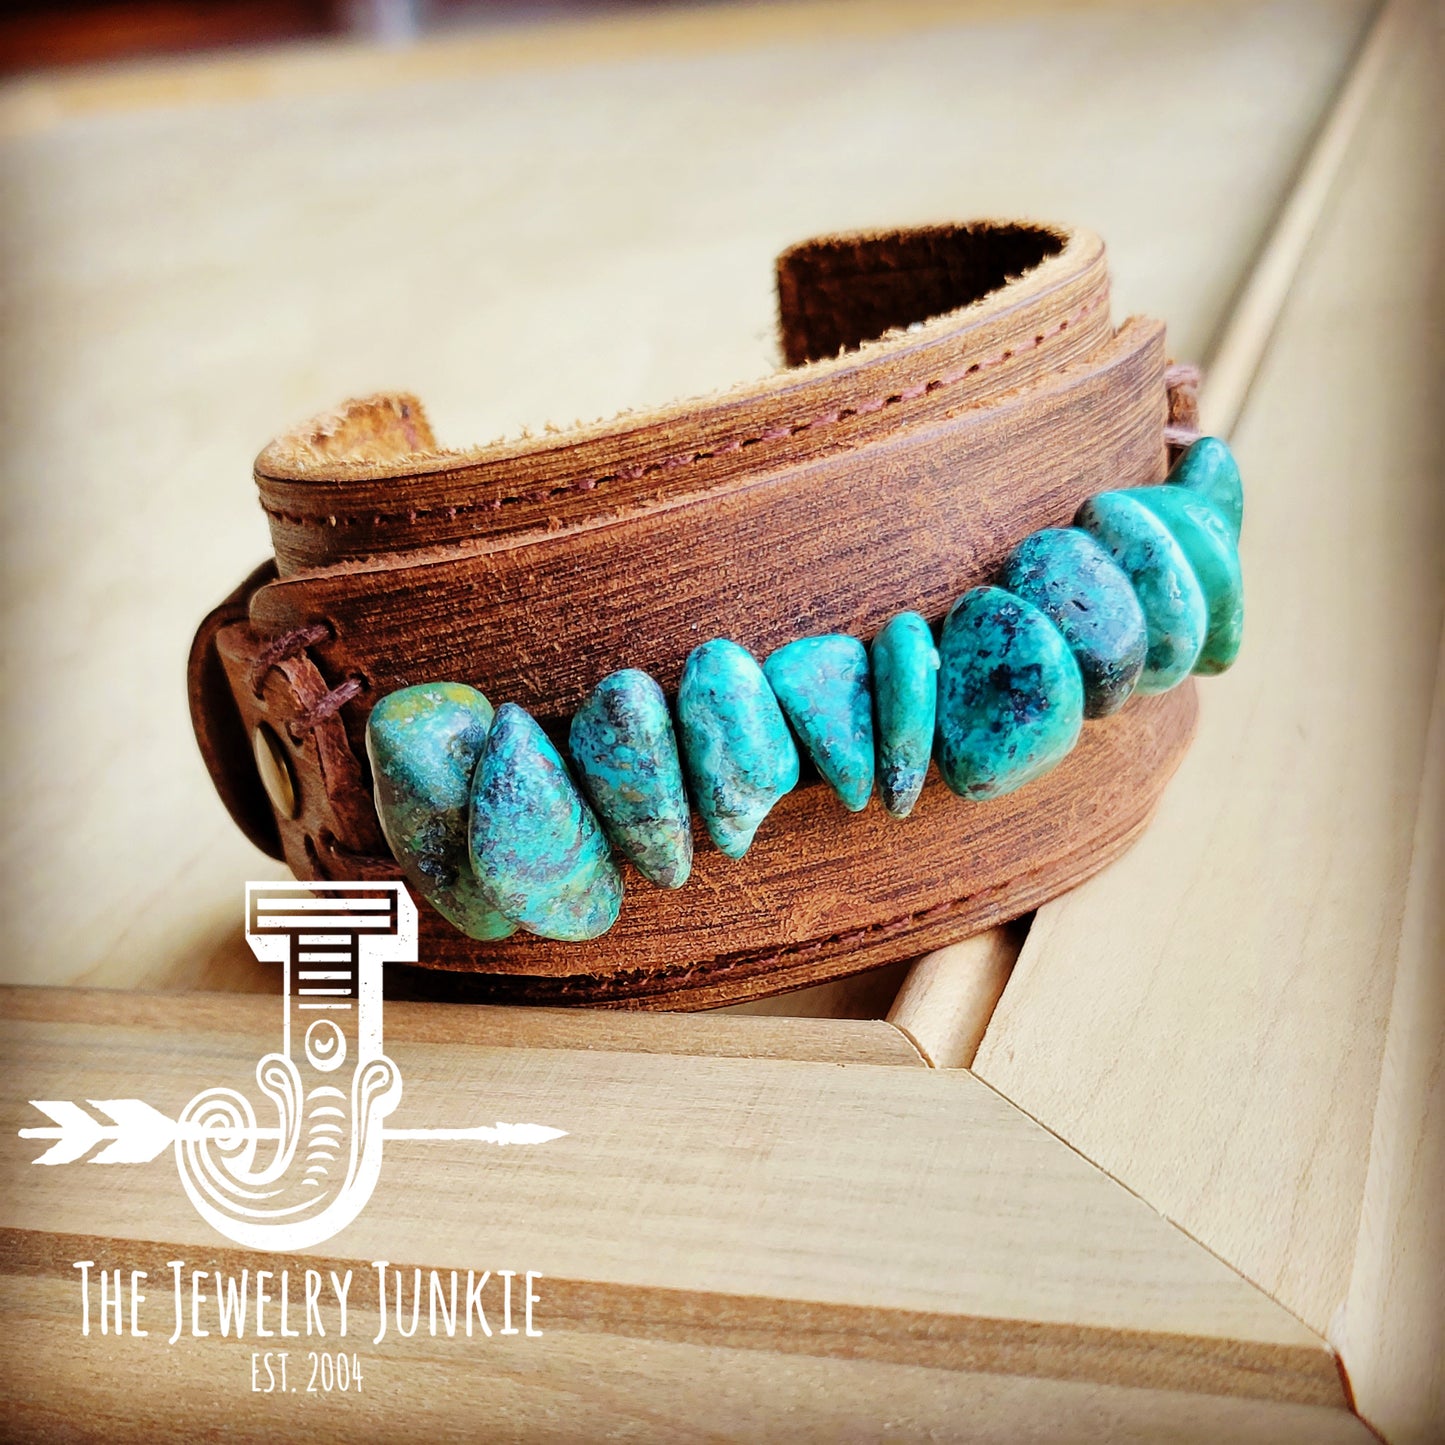 Dusty Leather Wide Cuff with Large Natural Turquoise Chunks 007u